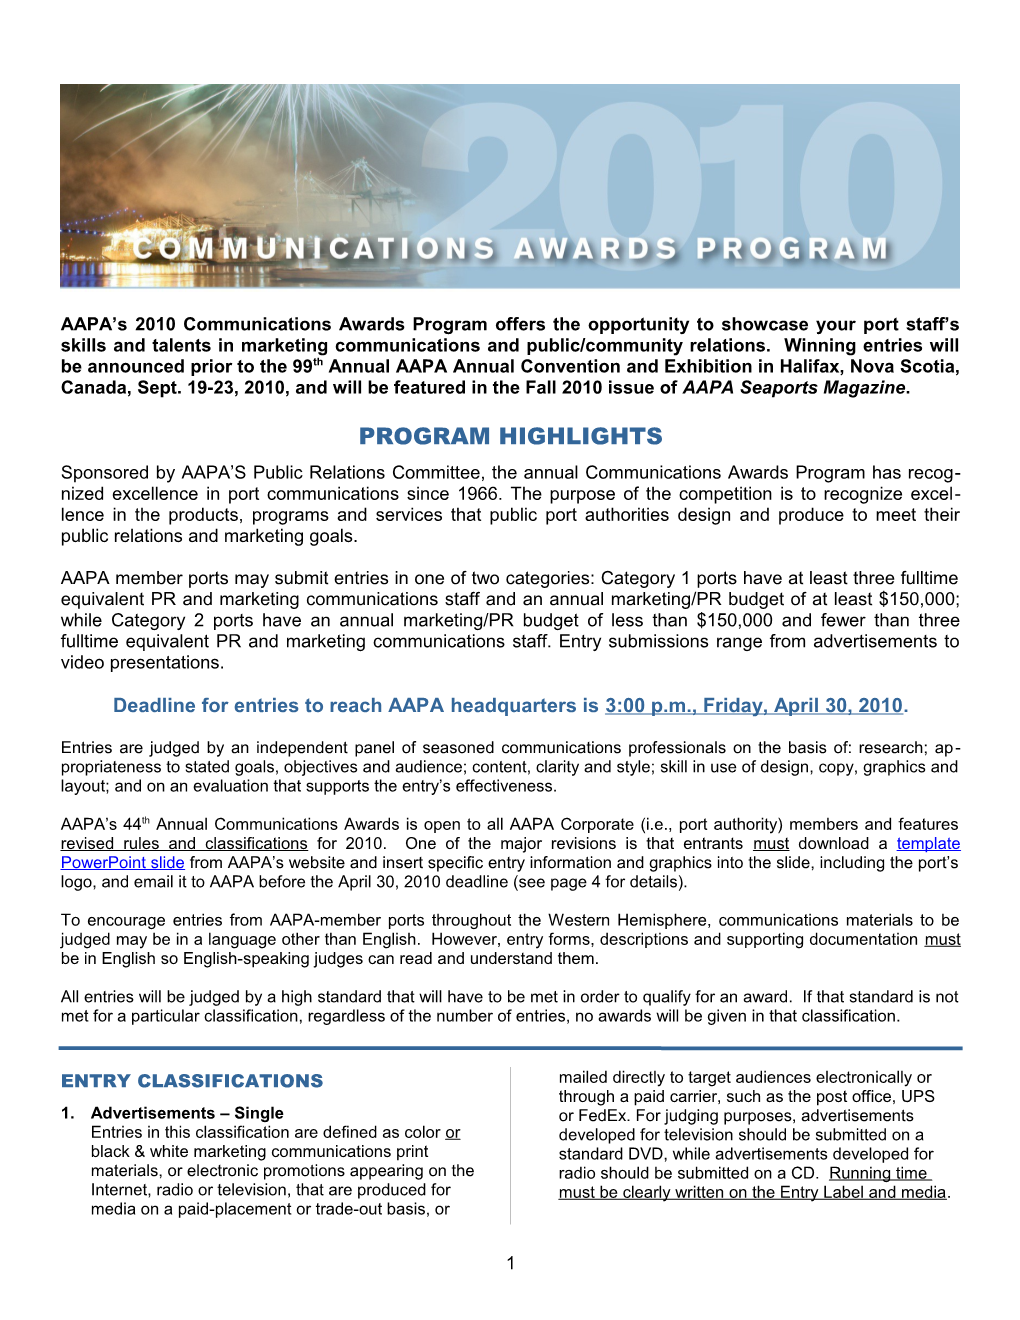 AAPA S 2010 Communications Awards Program Offers the Opportunity to Showcase Your Port